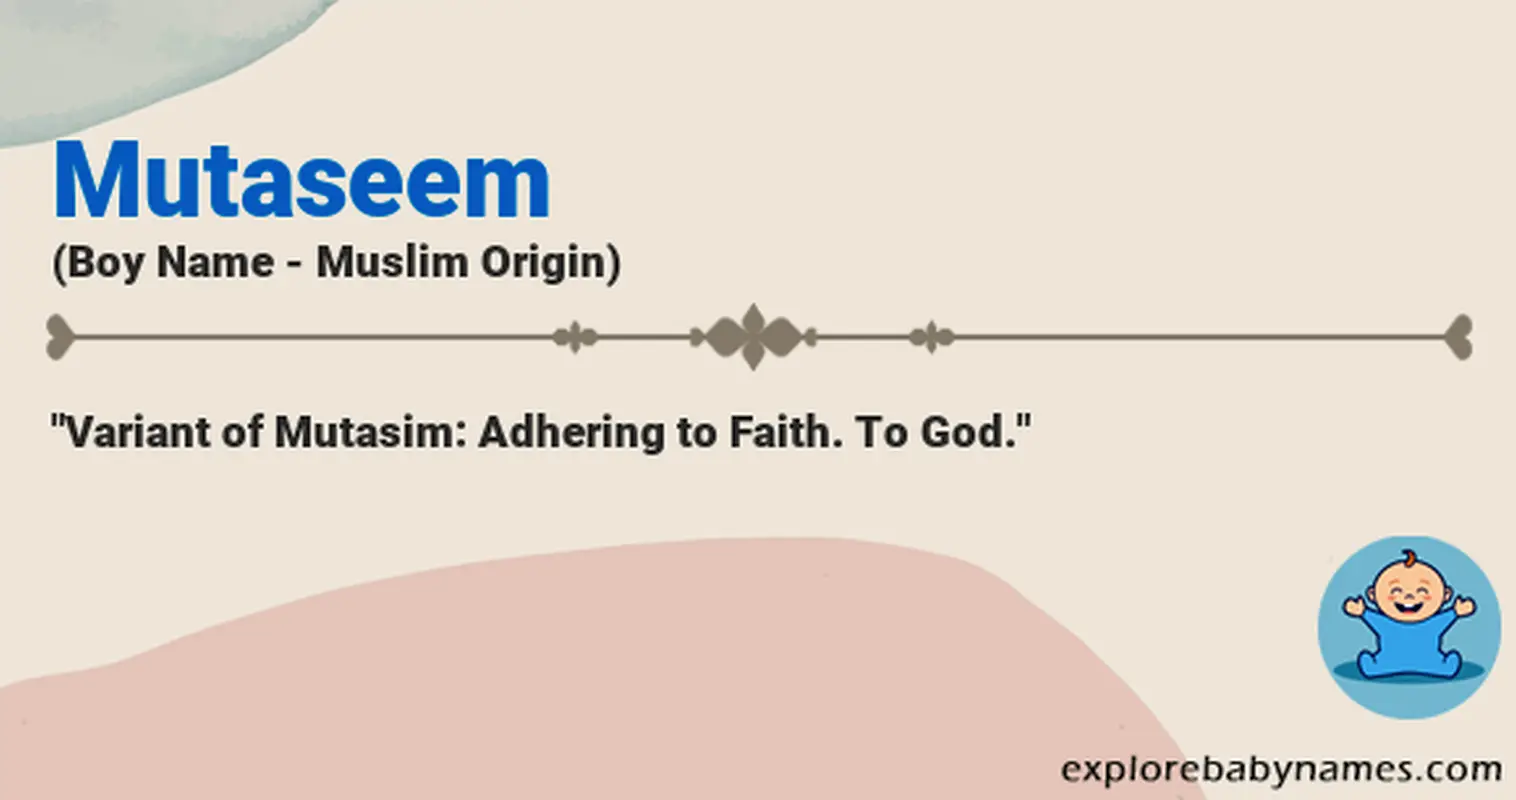 Meaning of Mutaseem